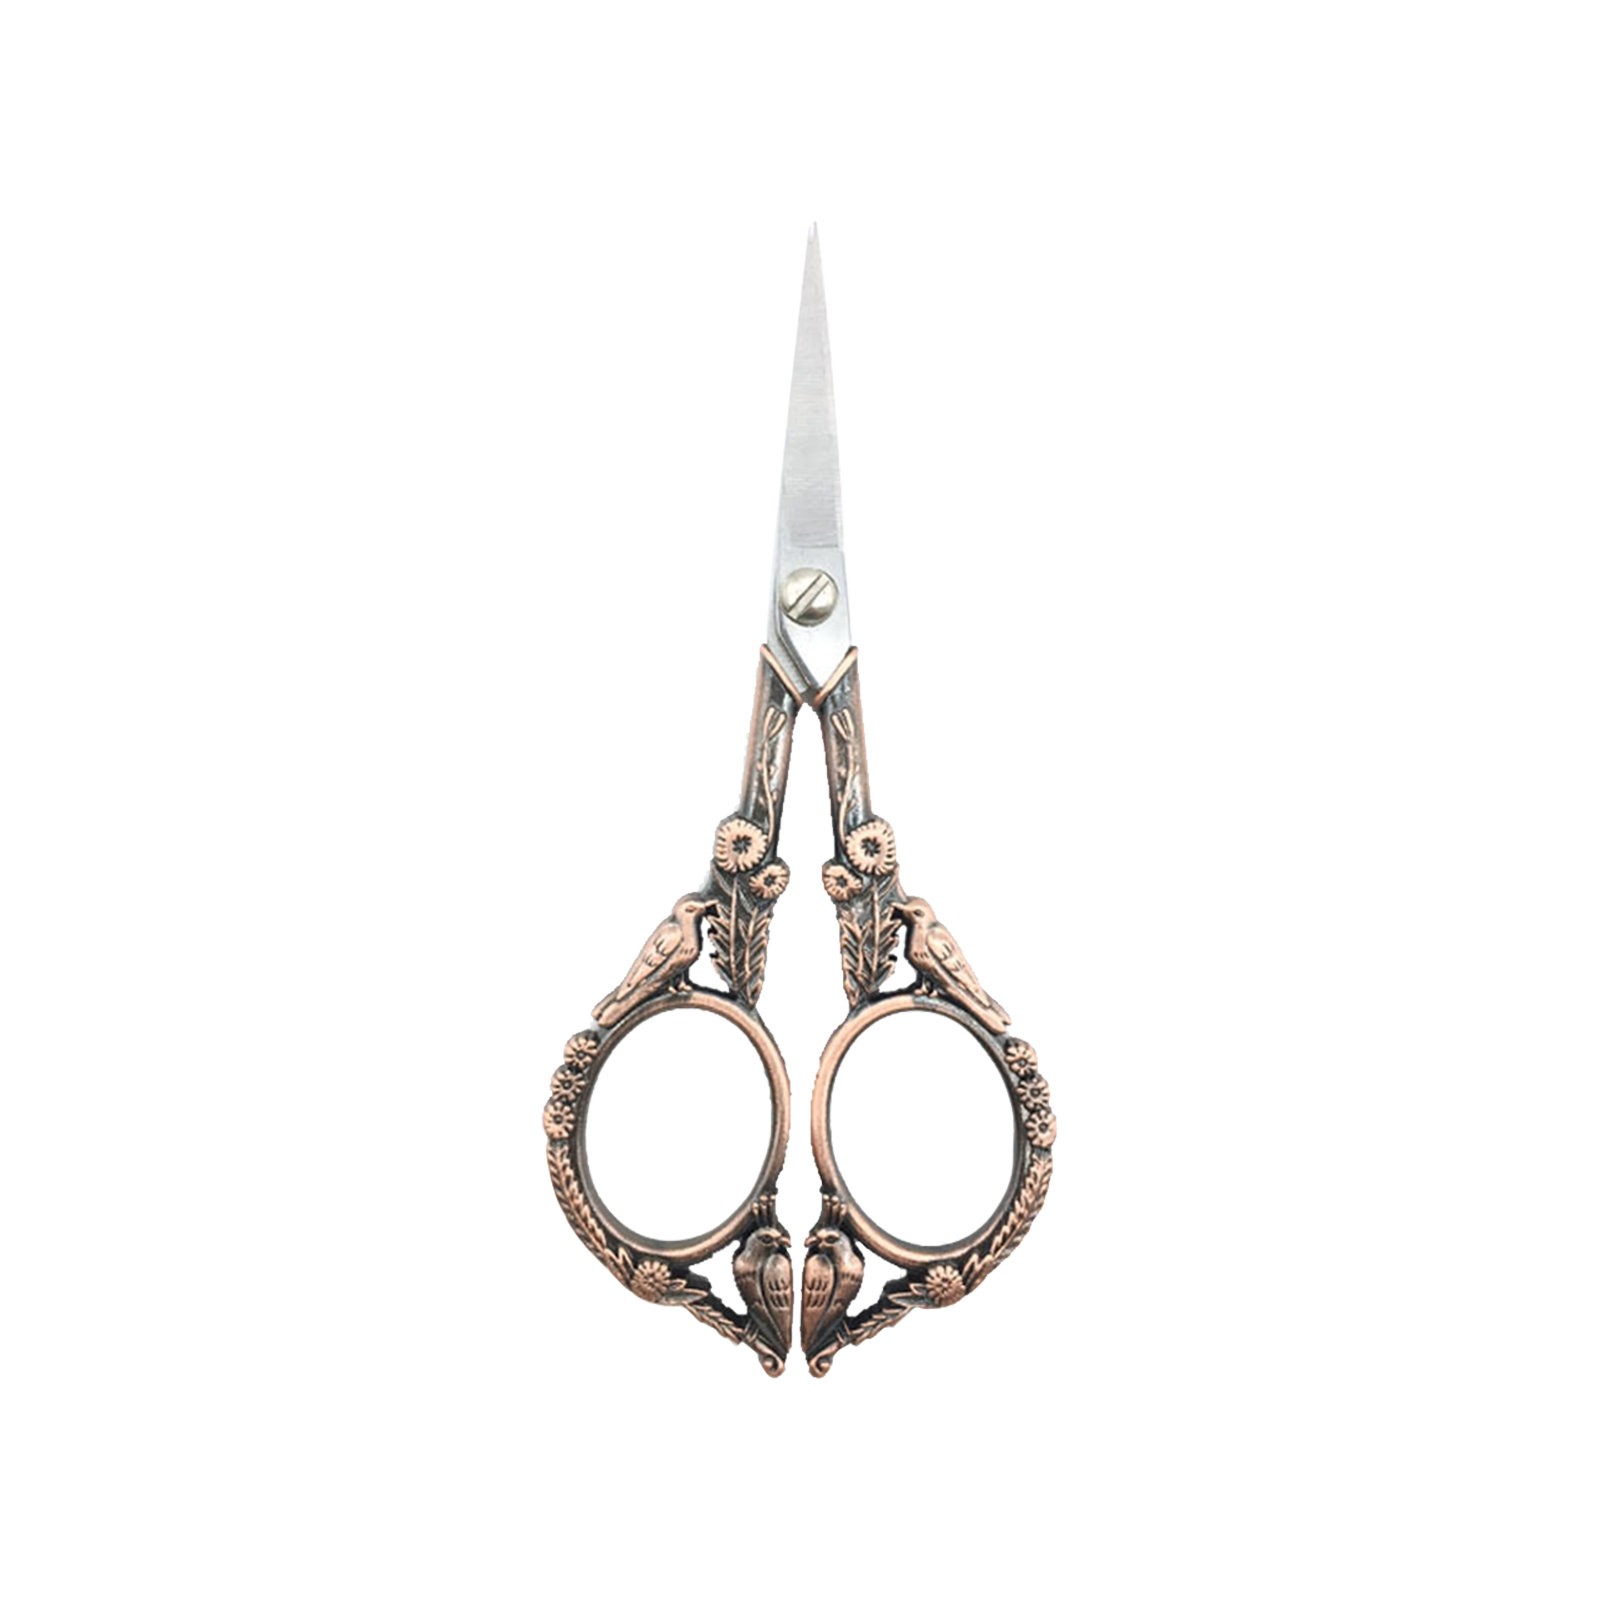 mnjin embroidery scissors sewing embroidery scissors small vintage sharp  detail shears for craft artwork needlework yarn handicraft diy tool thread  snips fb 